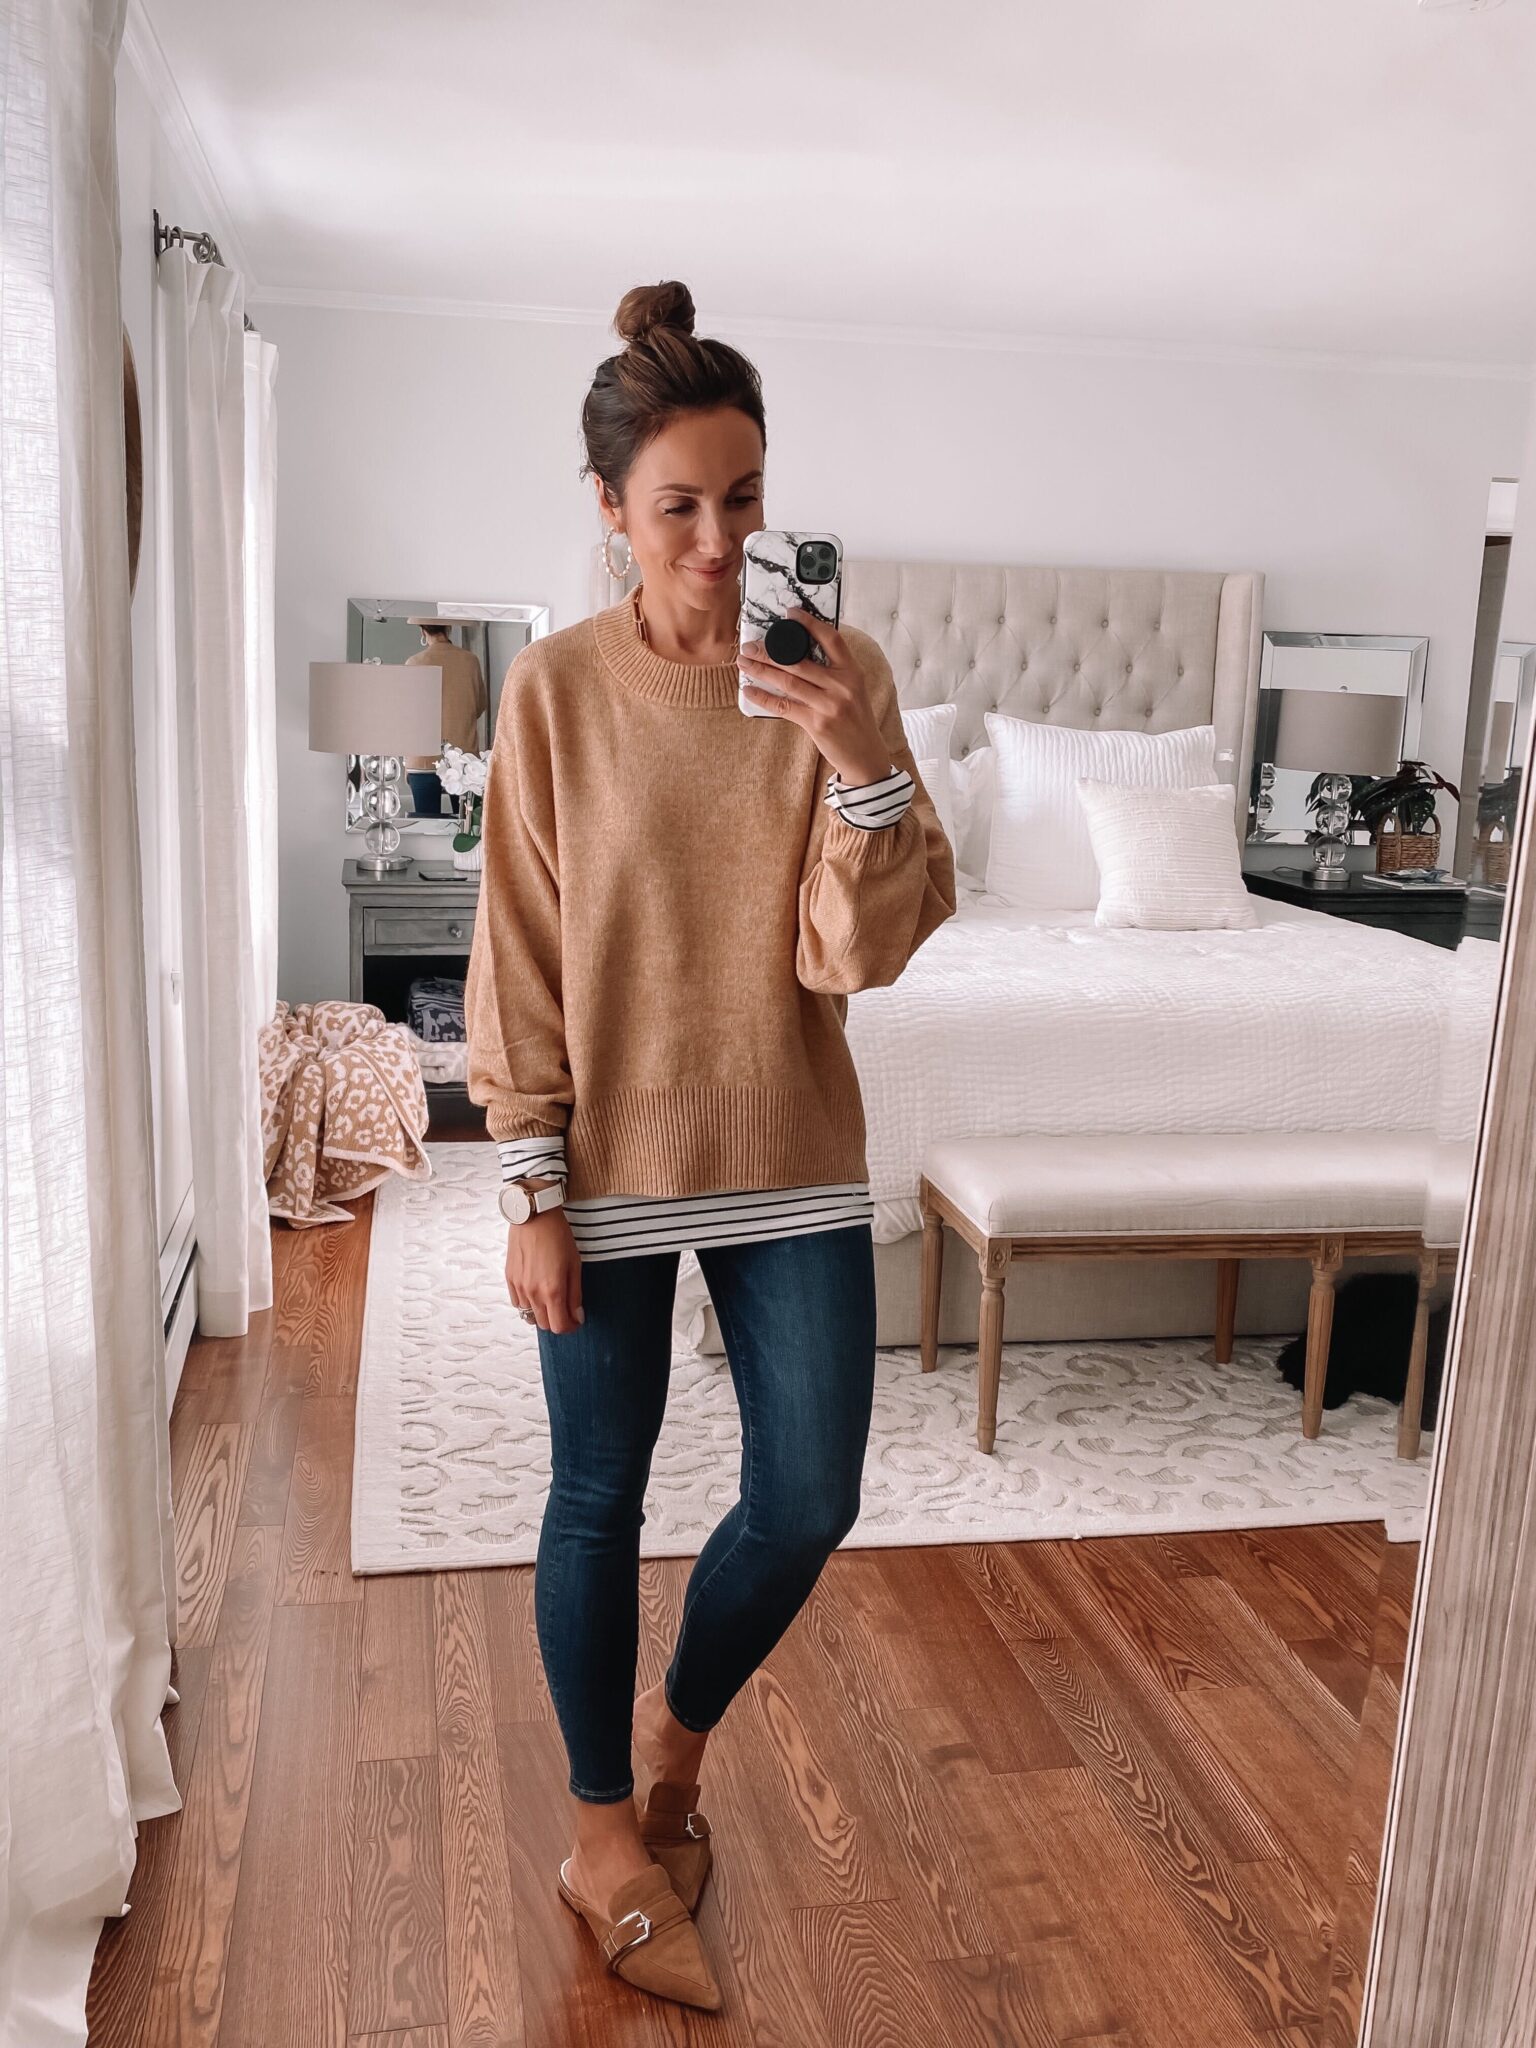 target sweater, skinny jeans, fall outfit idea